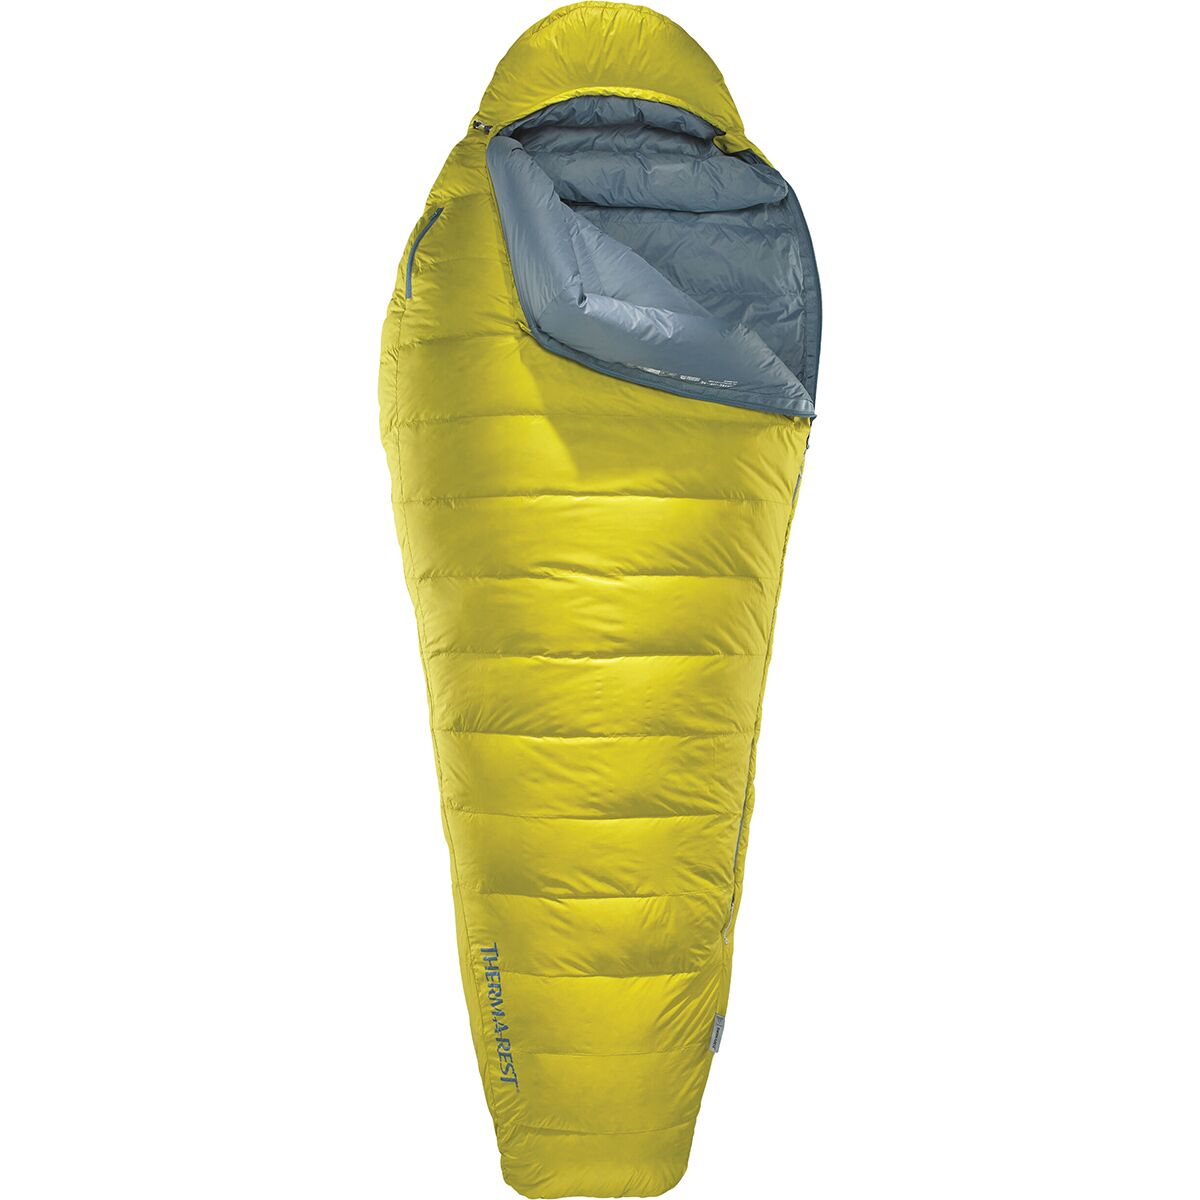 Therm-a-Rest Parsec Sleeping Bag: 20F Down